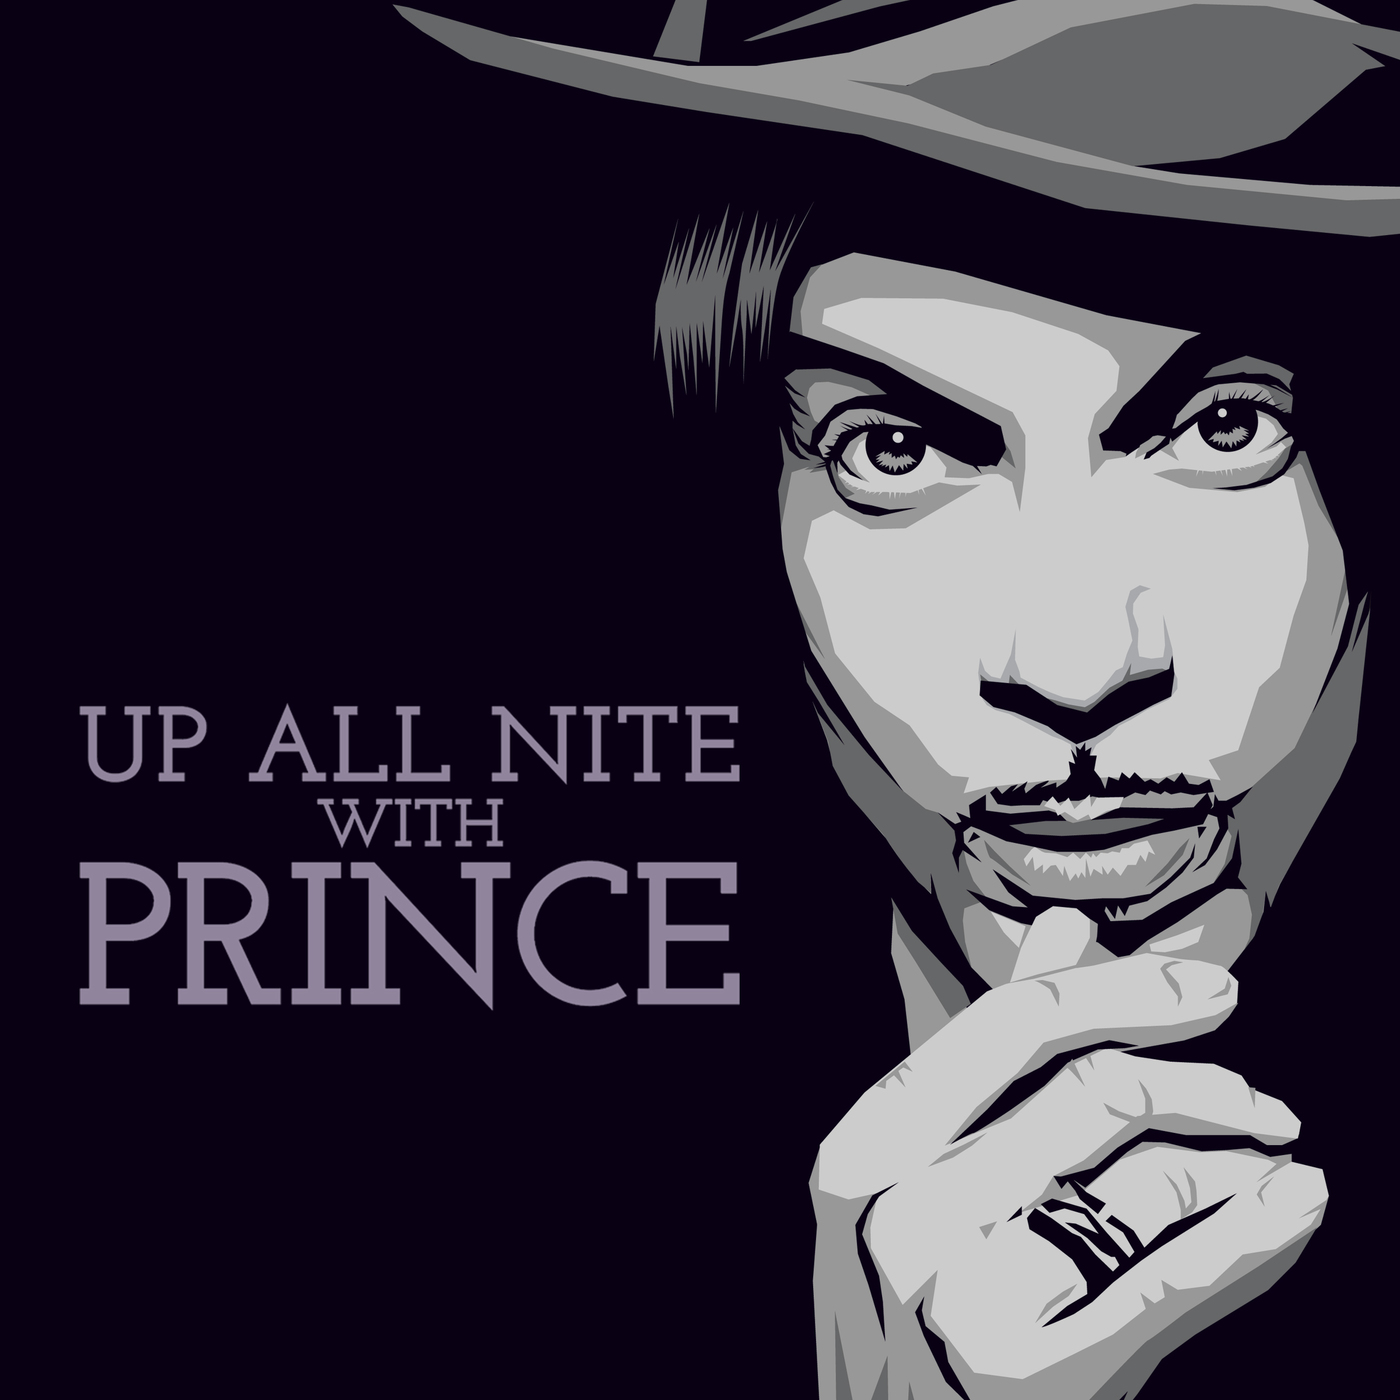 Up All Nite with Prince, Episode 2: It Ain’t Over!